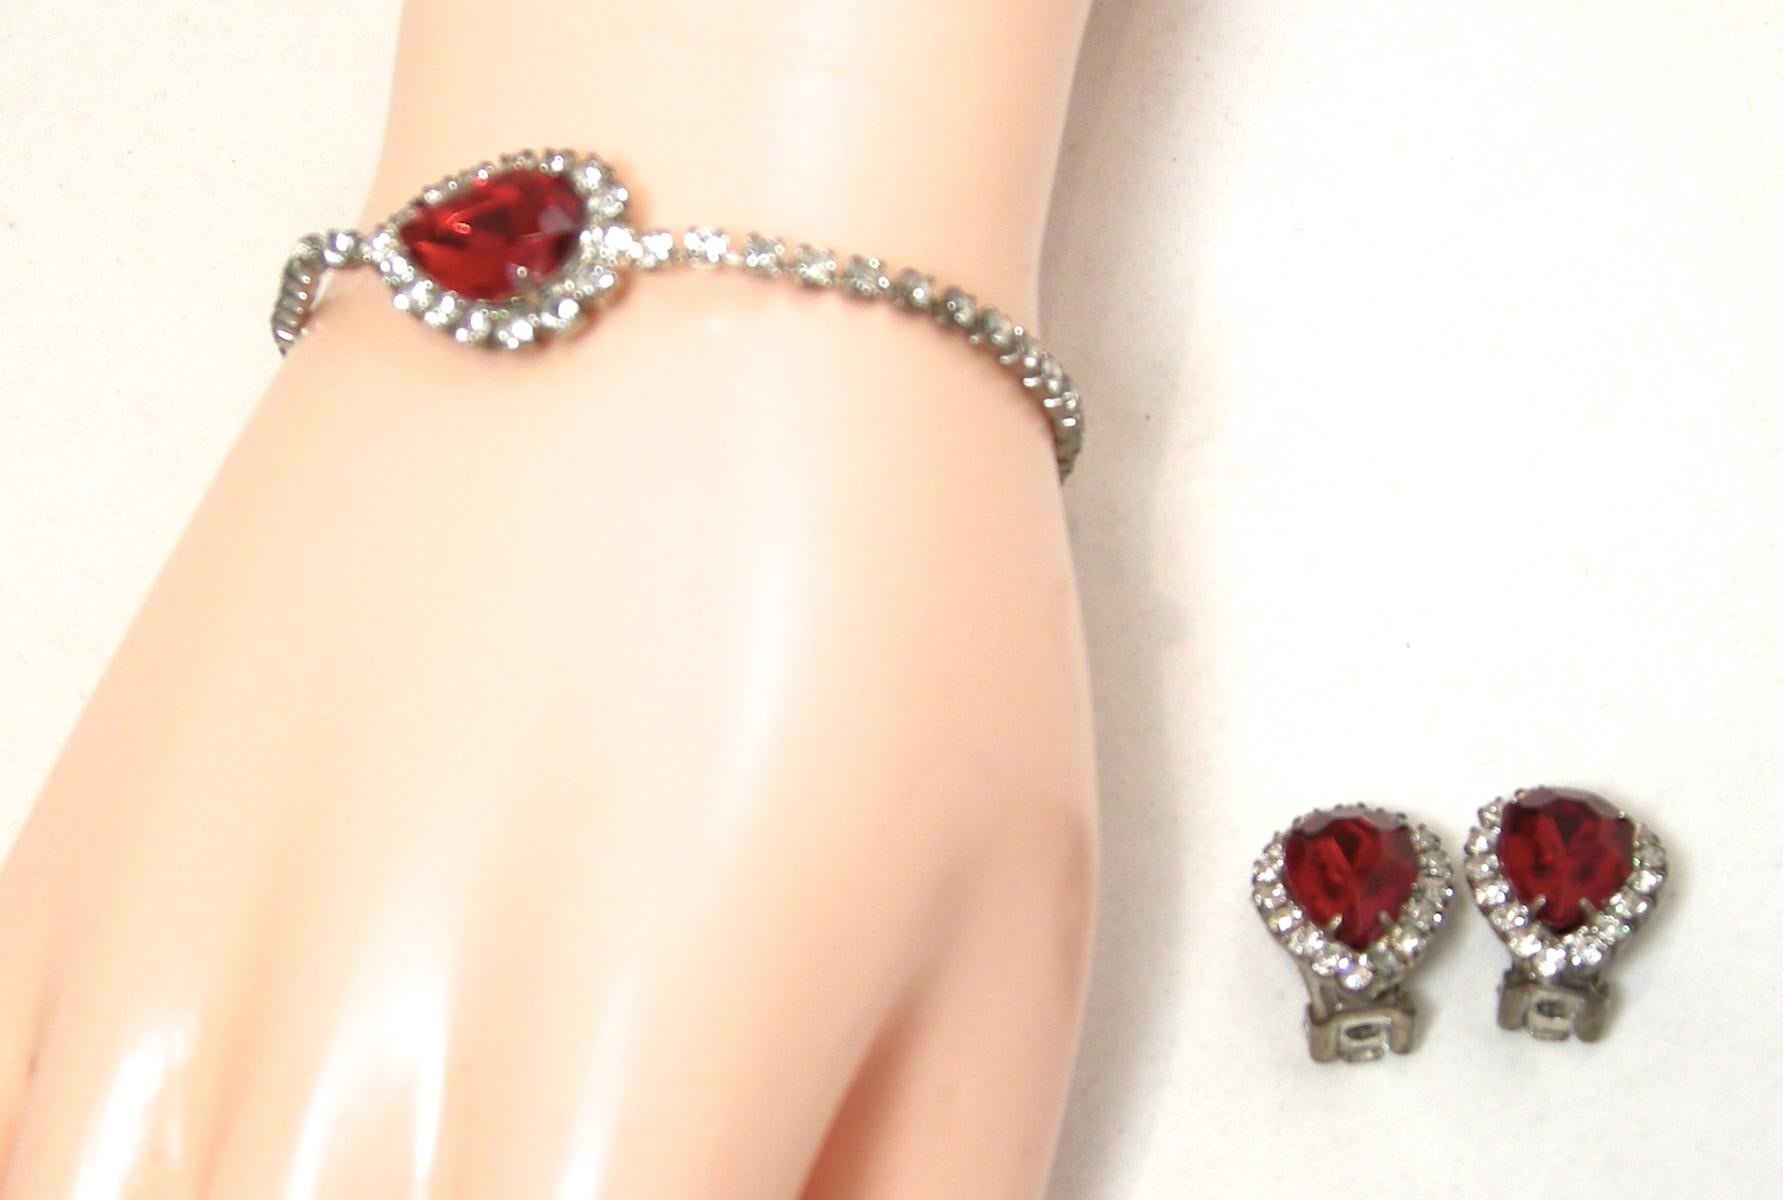 This vintage set includes a matching bracelet & clip earrings.  The bracelet has a center red crystal with clear crystals around the wrist with a fold over clasp.  In The bracelet measures 7-1/2” x 5/8” and the matching clip earrings are 3/4” x 5/8”